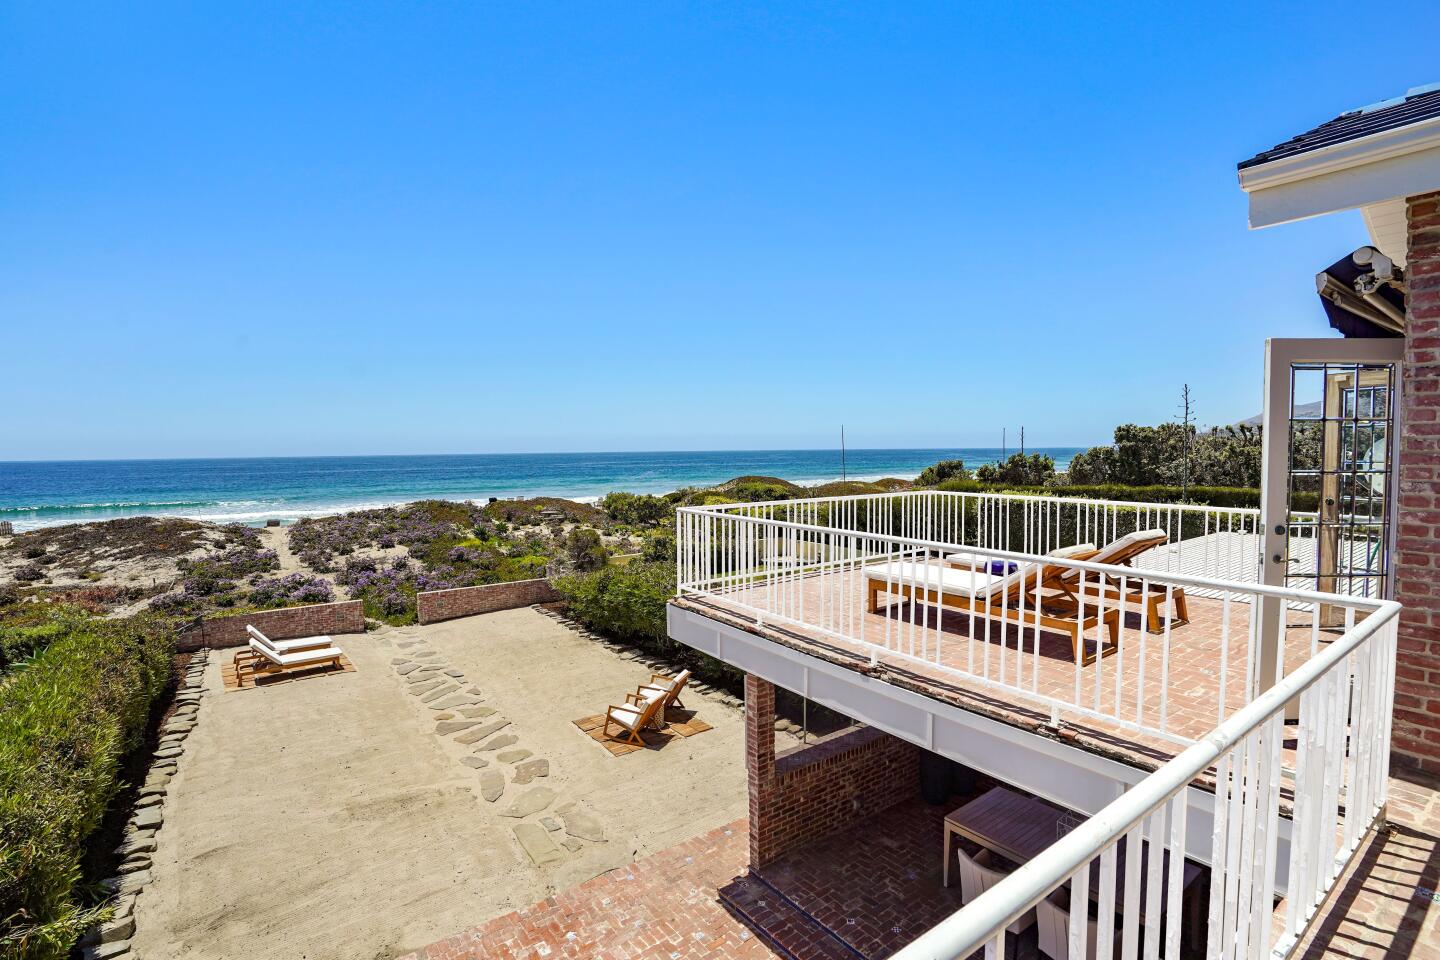 The deck with white railings overlooks the grounds and the ocean.